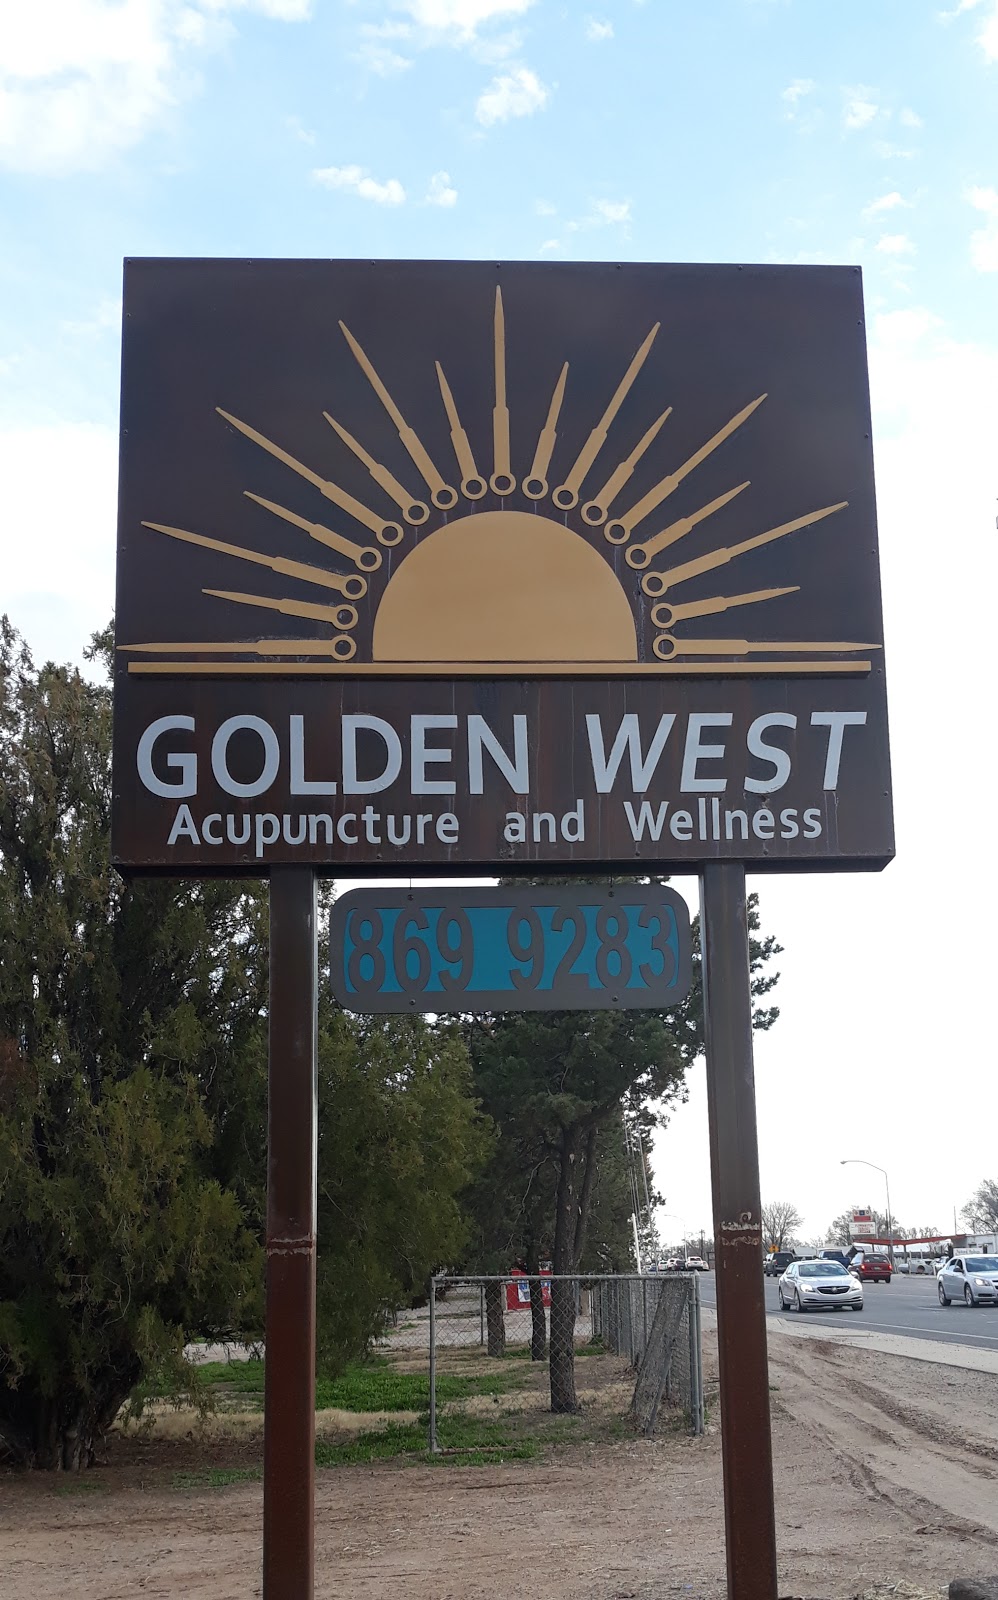 Golden West Acupuncture and Wellness LLC. | 590 Bosque Farms Blvd, Bosque Farms, NM 87068 | Phone: (505) 869-9283